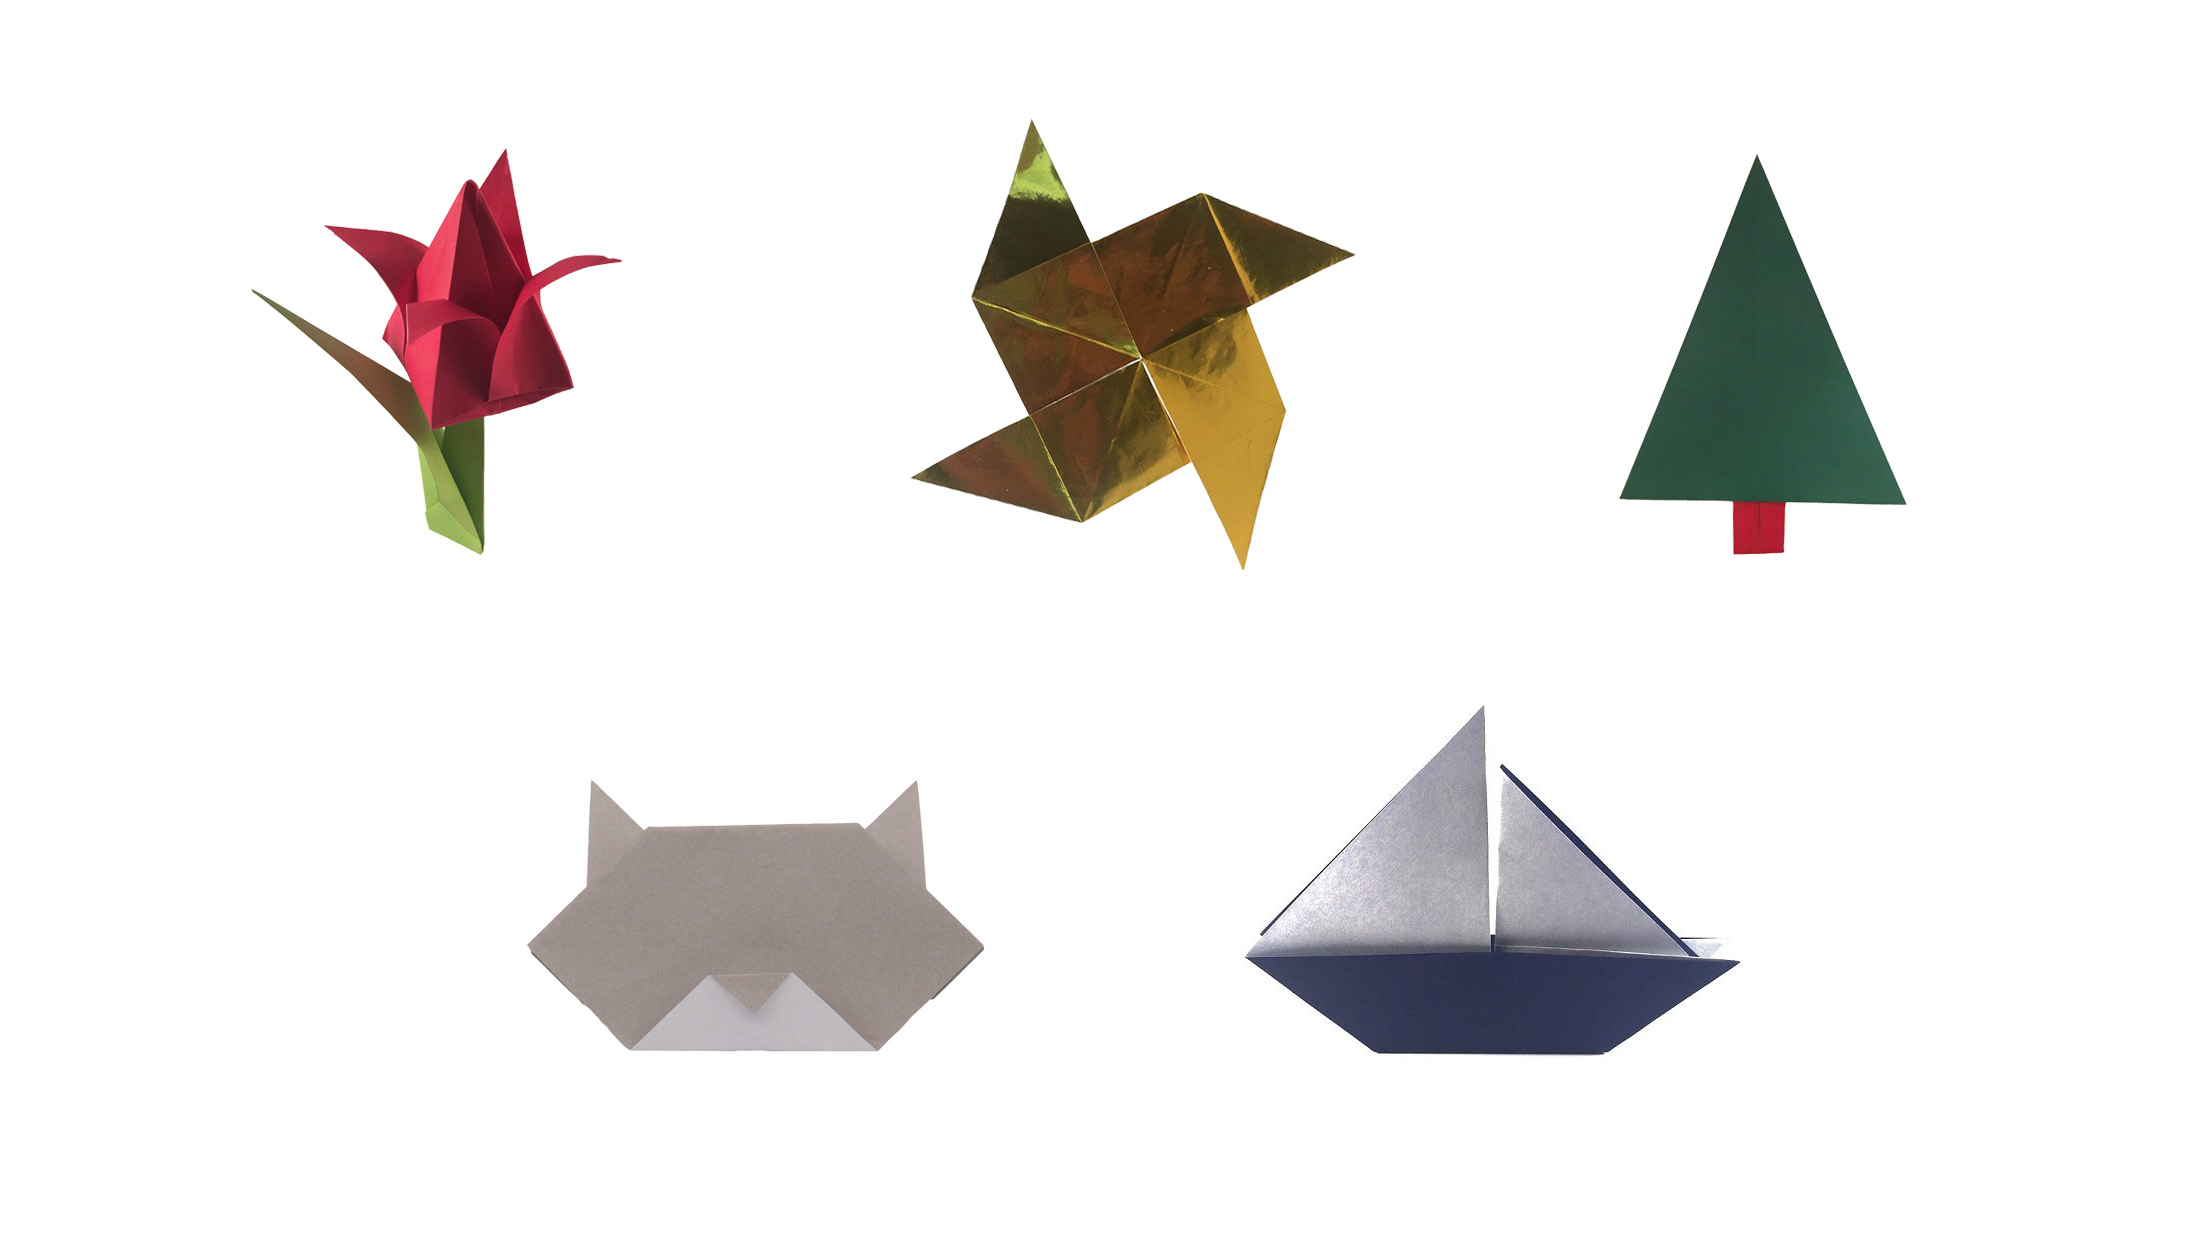 https://origamiexpressions.com/wp-content/uploads/2020/11/Origami-for-Kids-Featured-Image.jpg